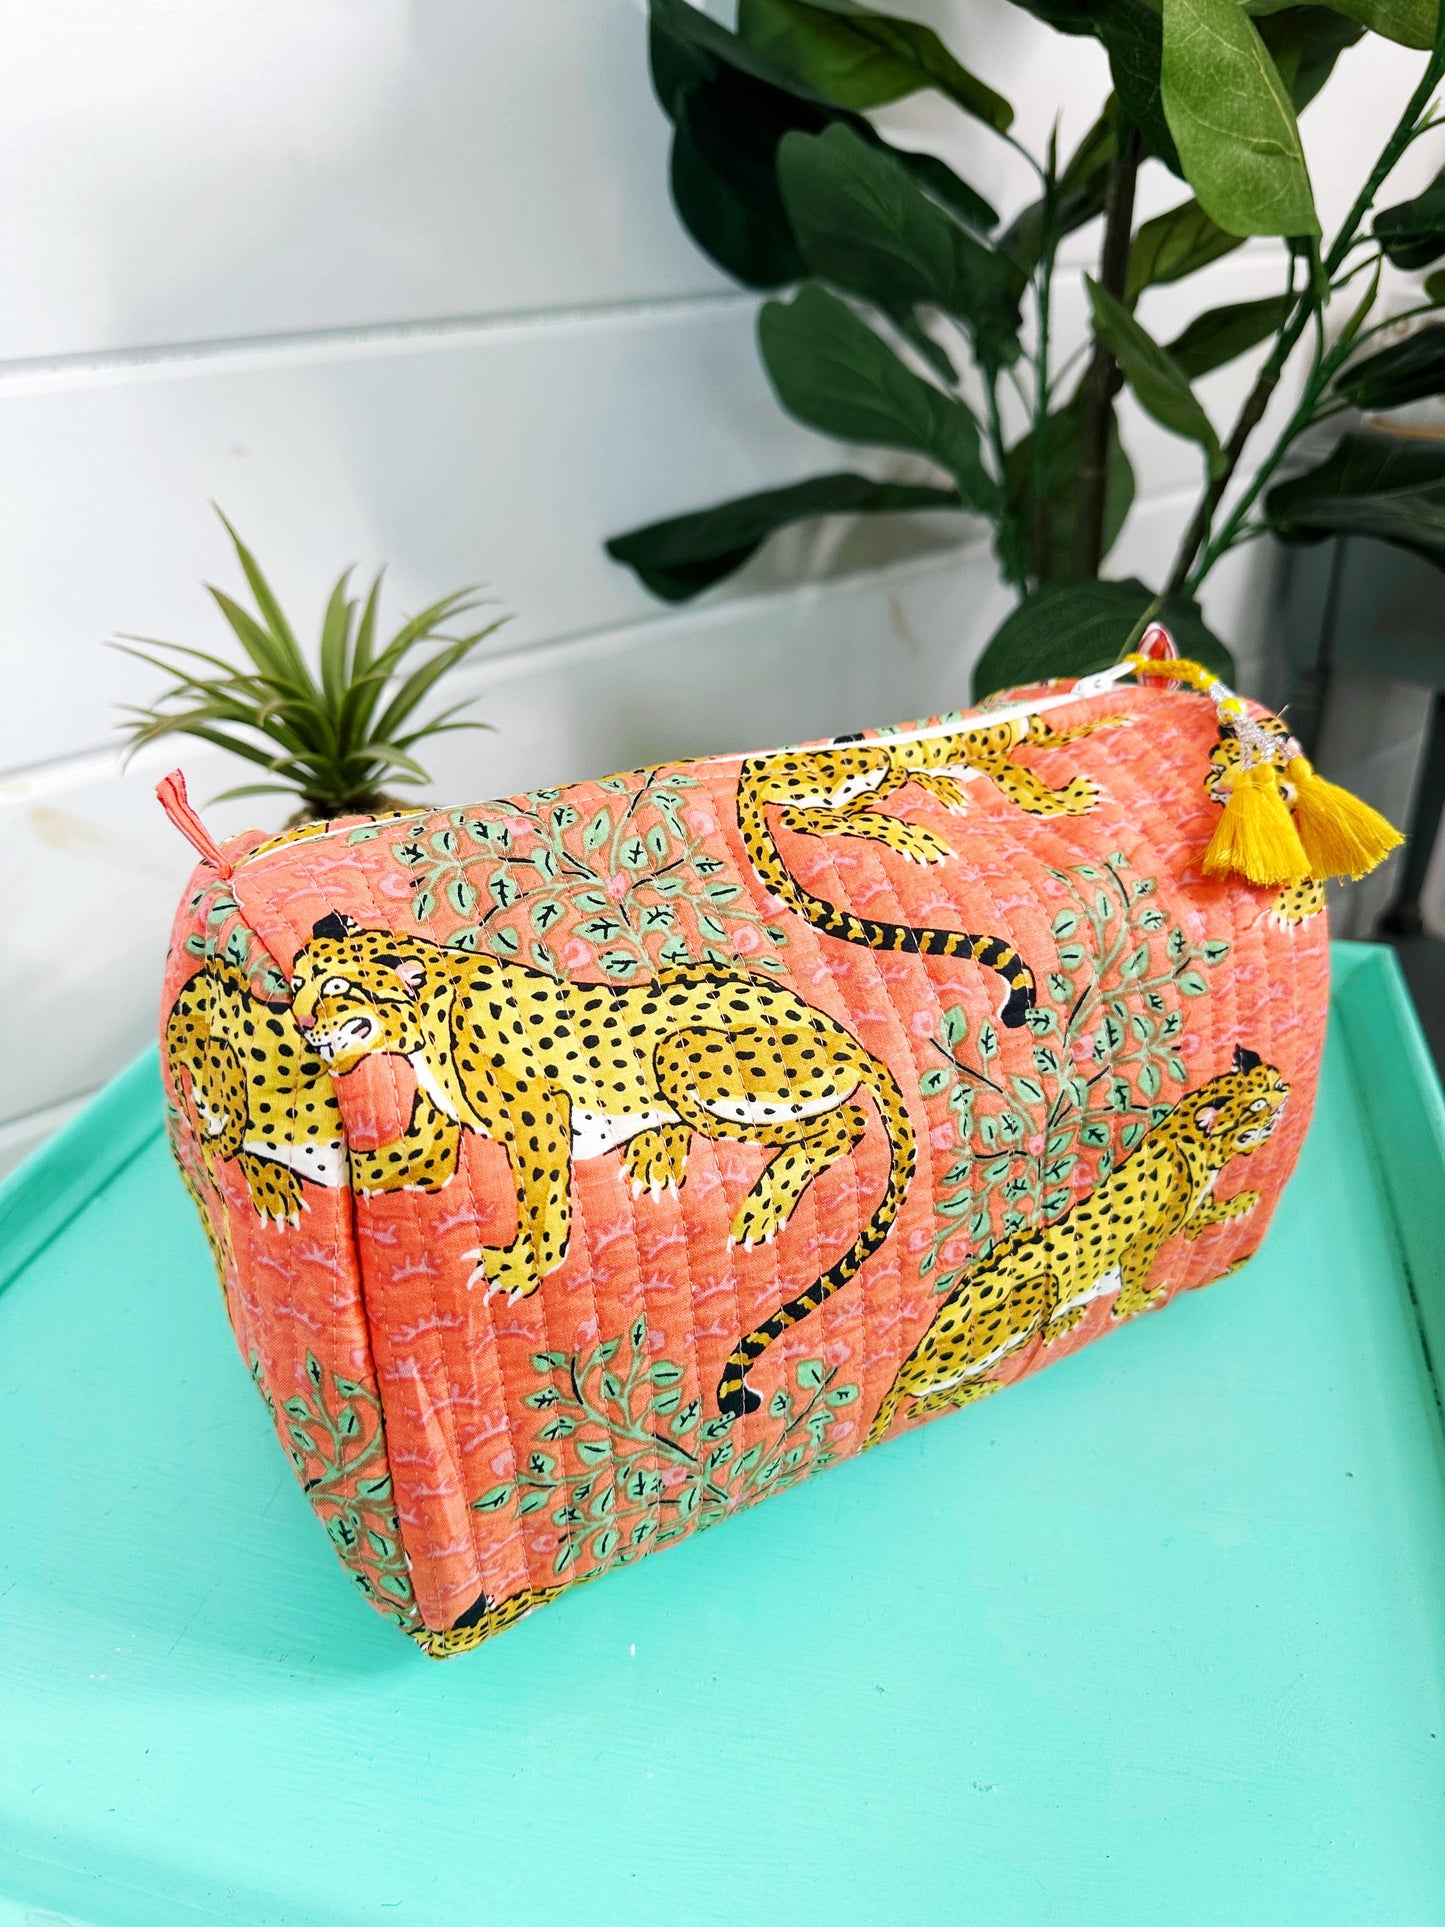 Coral Tigers Quilted Makeup Travel Cosmetics Toiletry Bag